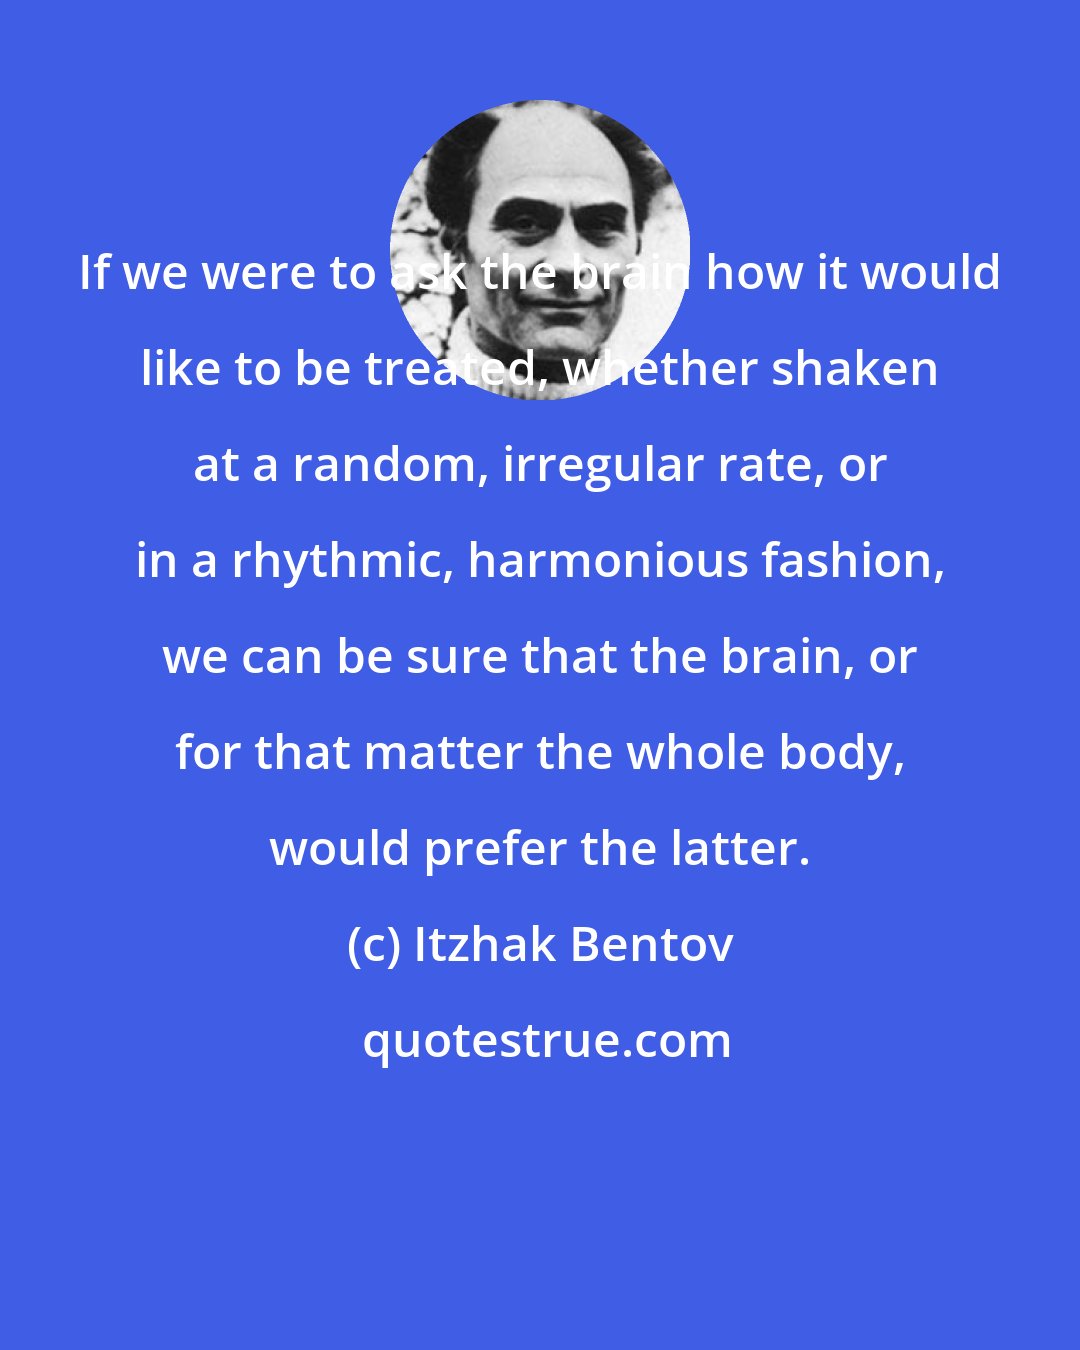 Itzhak Bentov: If we were to ask the brain how it would like to be treated, whether shaken at a random, irregular rate, or in a rhythmic, harmonious fashion, we can be sure that the brain, or for that matter the whole body, would prefer the latter.